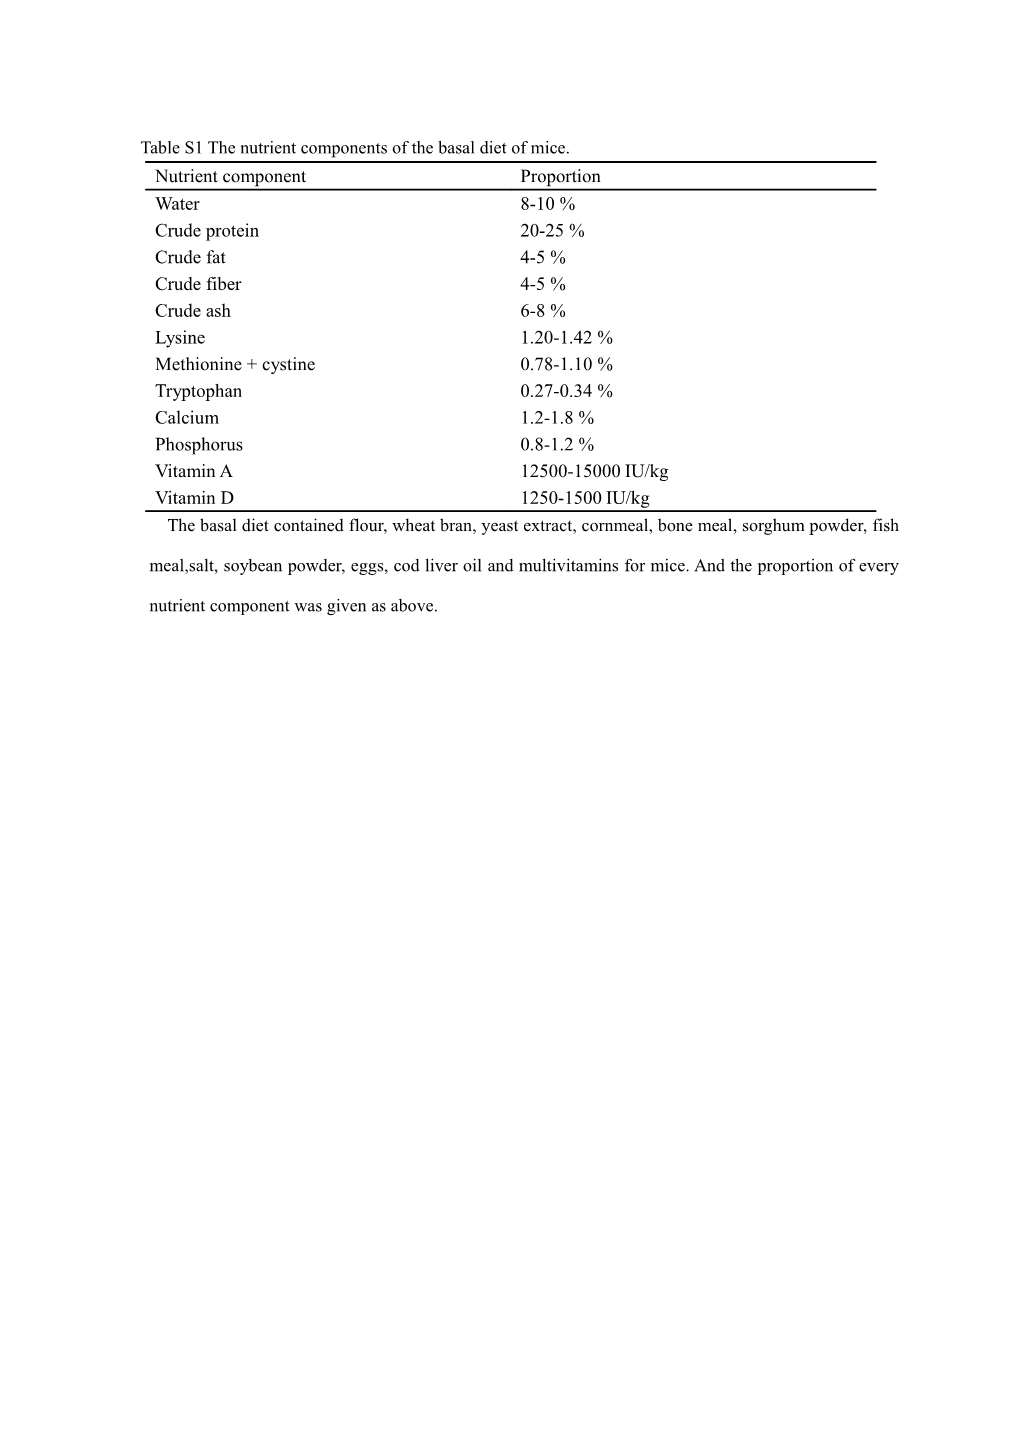 Table S1 the Nutrient Components of the Basal Diet of Mice